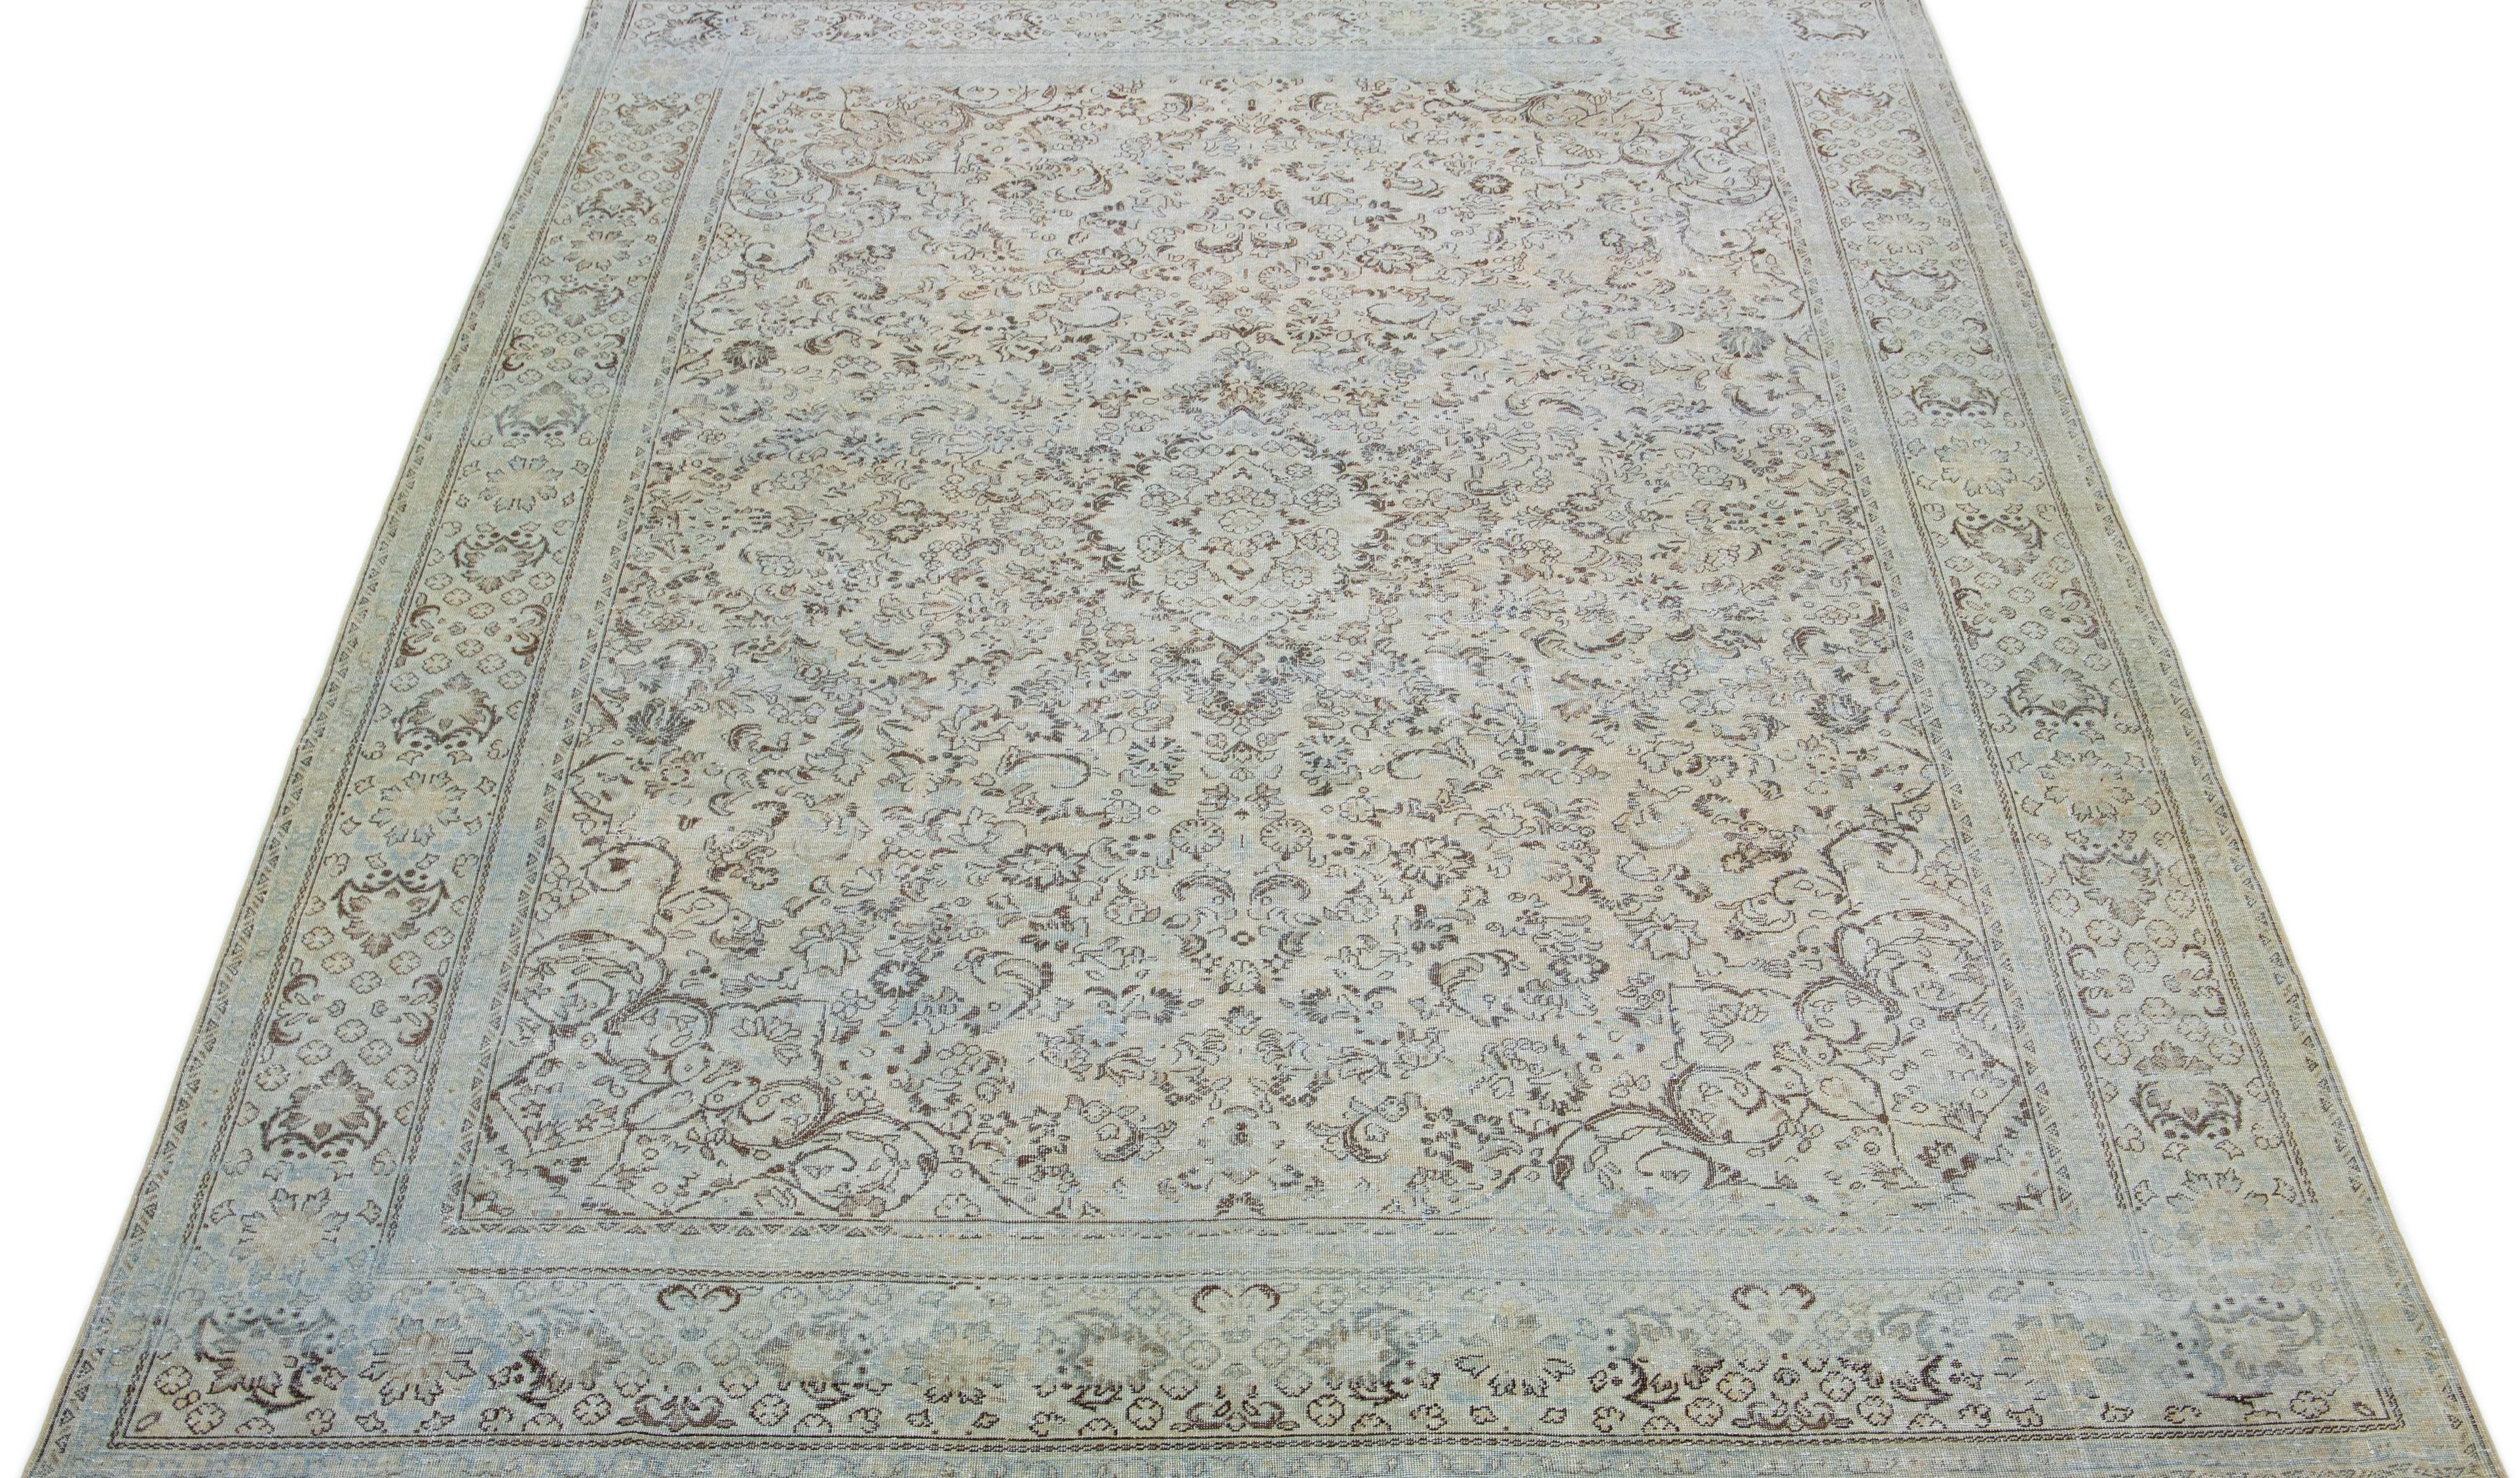 This hand-knotted mahal wool rug features a beige color field accented by blue and brown hues arranged in a classic floral medallion pattern.

This rug measures: 10' x 15'3